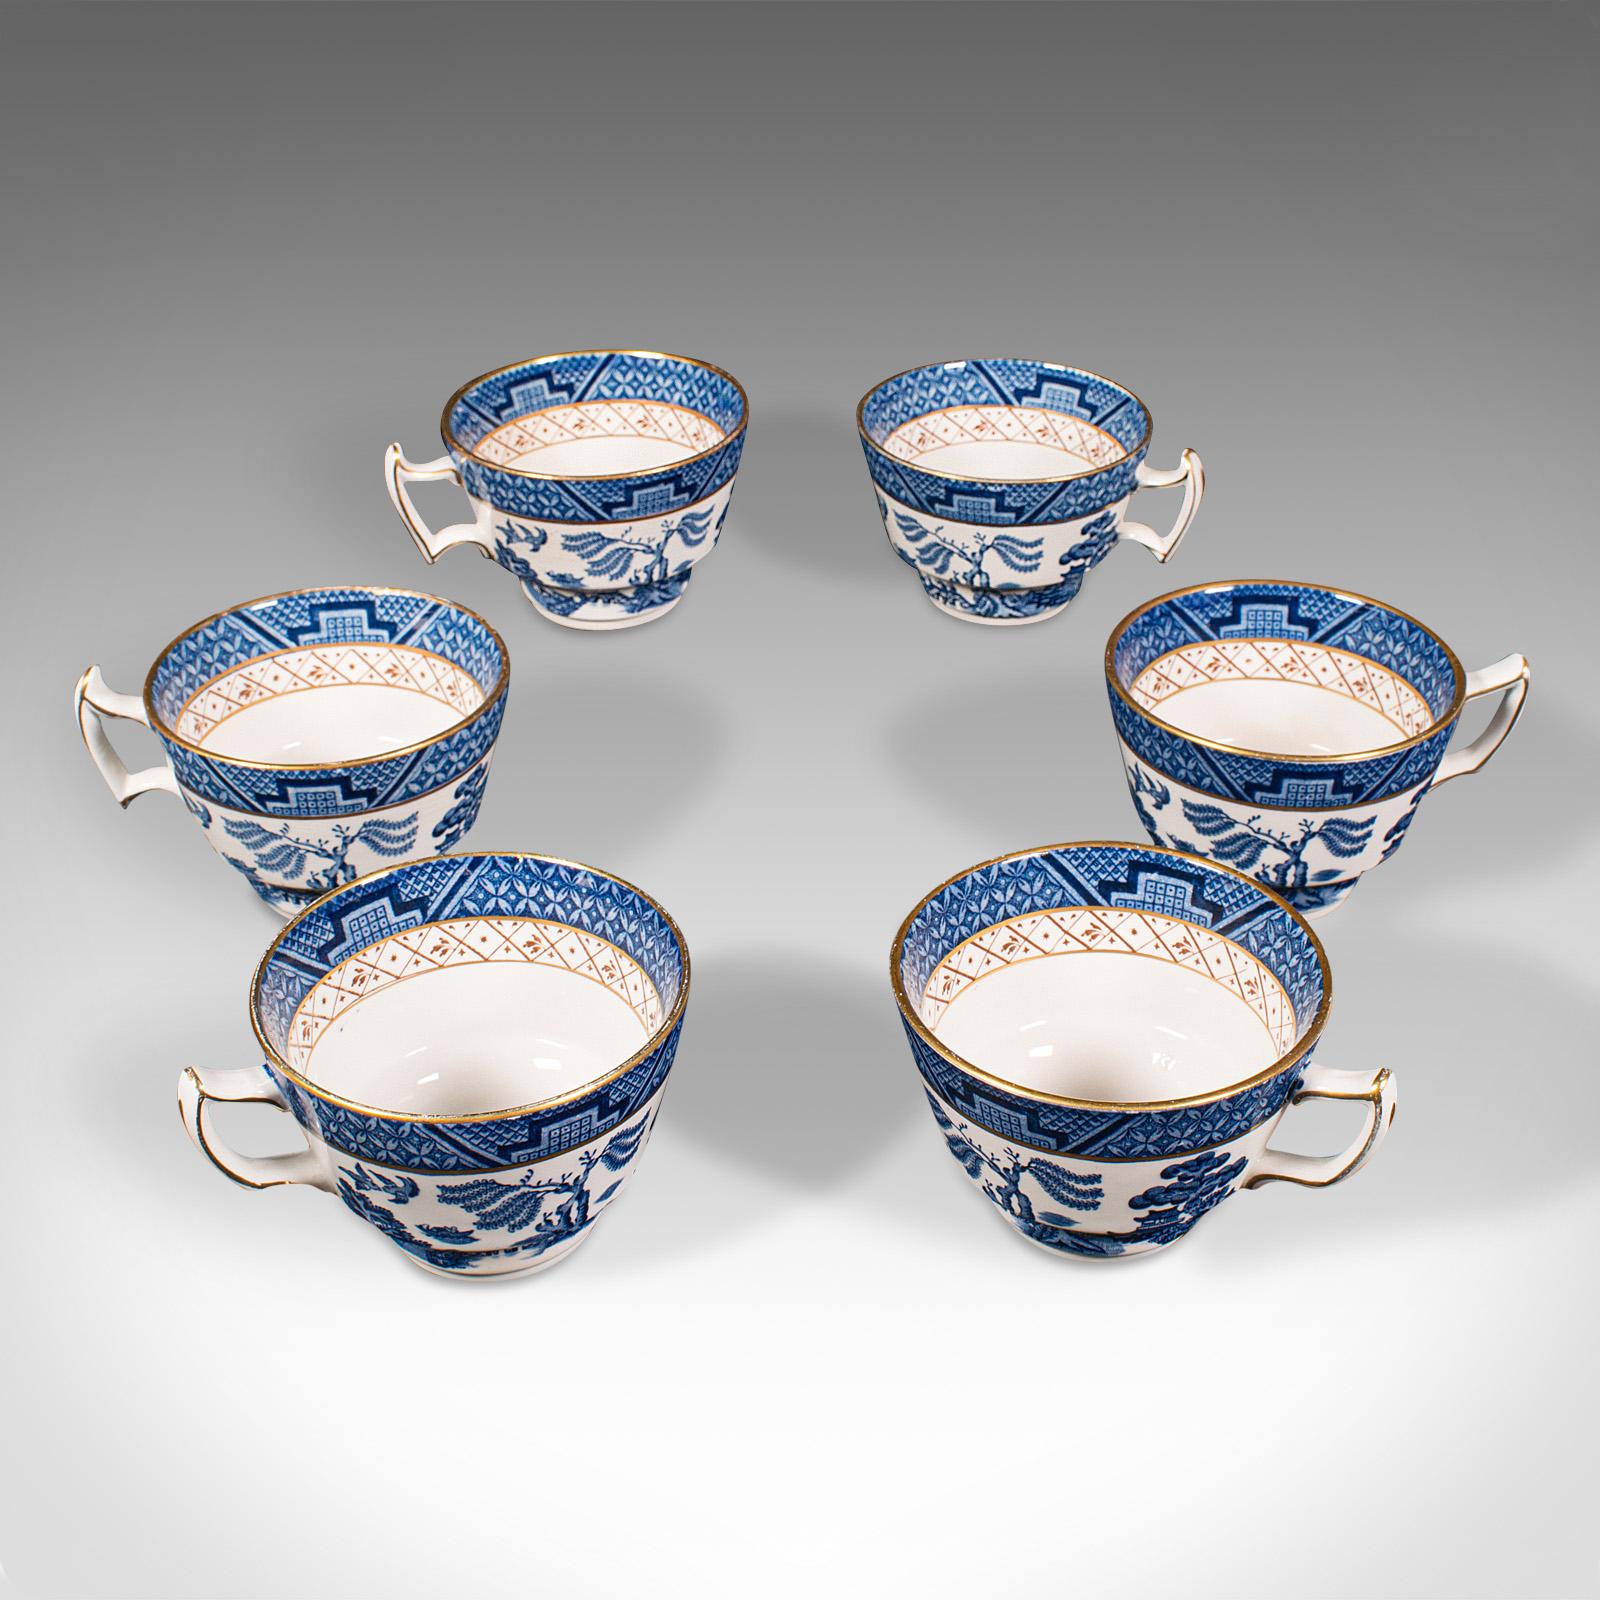 This is a vintage 6 person tea service. An English, ceramic decorative afternoon tea set with teapot and jugs, dating to the early 20th century, circa 1930.

Delightfully decorative, quality tea service, with 16 pieces total
Displaying a desirable